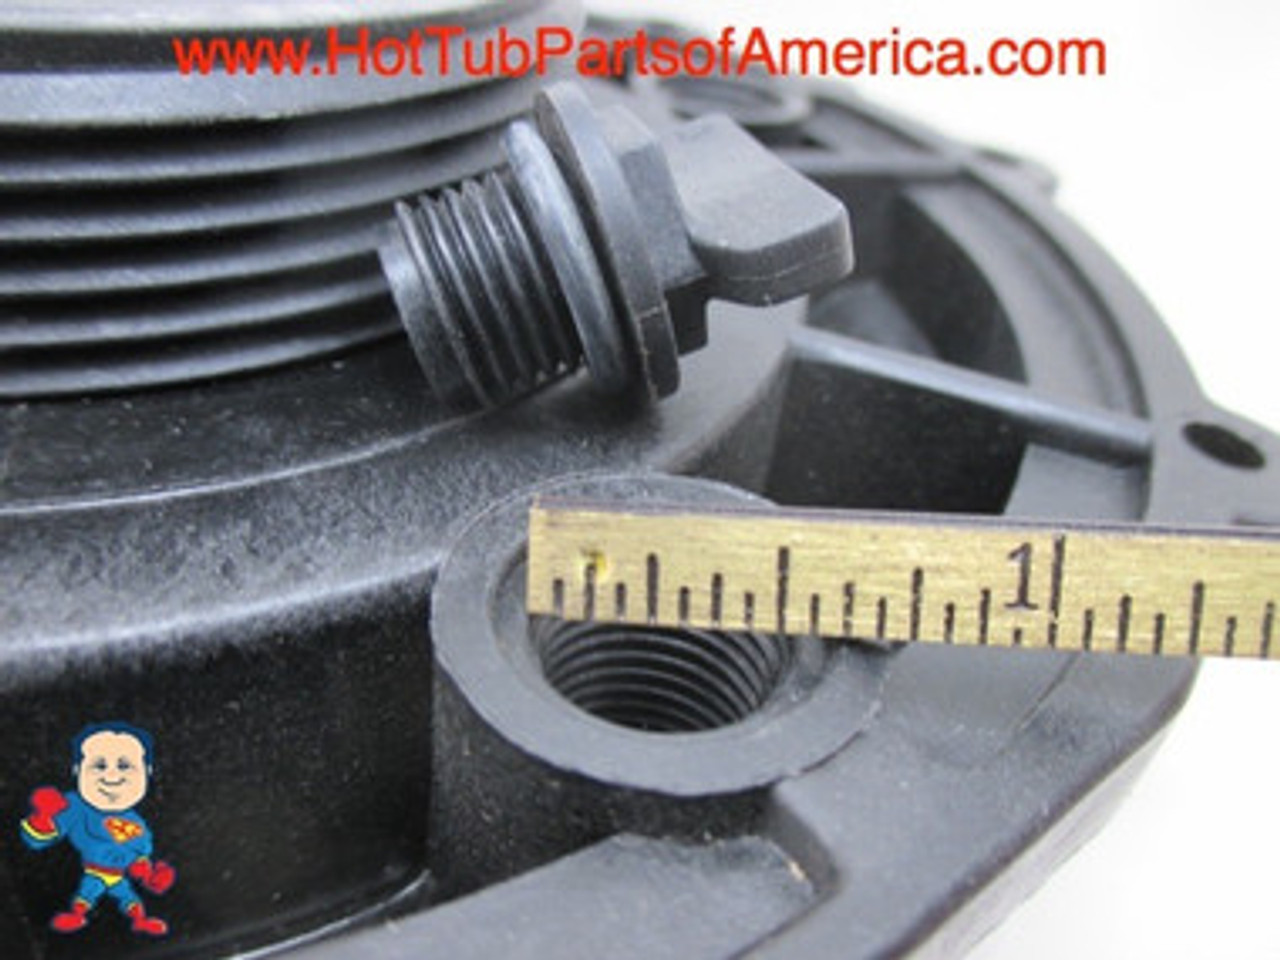 This Bleeder plug is usually found only on the newer style 48 or 56 frame and or the Jacuzzi Sundance versions of the Intertek LX Pump Wet Ends.... If you need the fine thread version this one is right if you need the Old Style Coarse thread version look for the old coarse thread version of the Intertek Lx Pump...